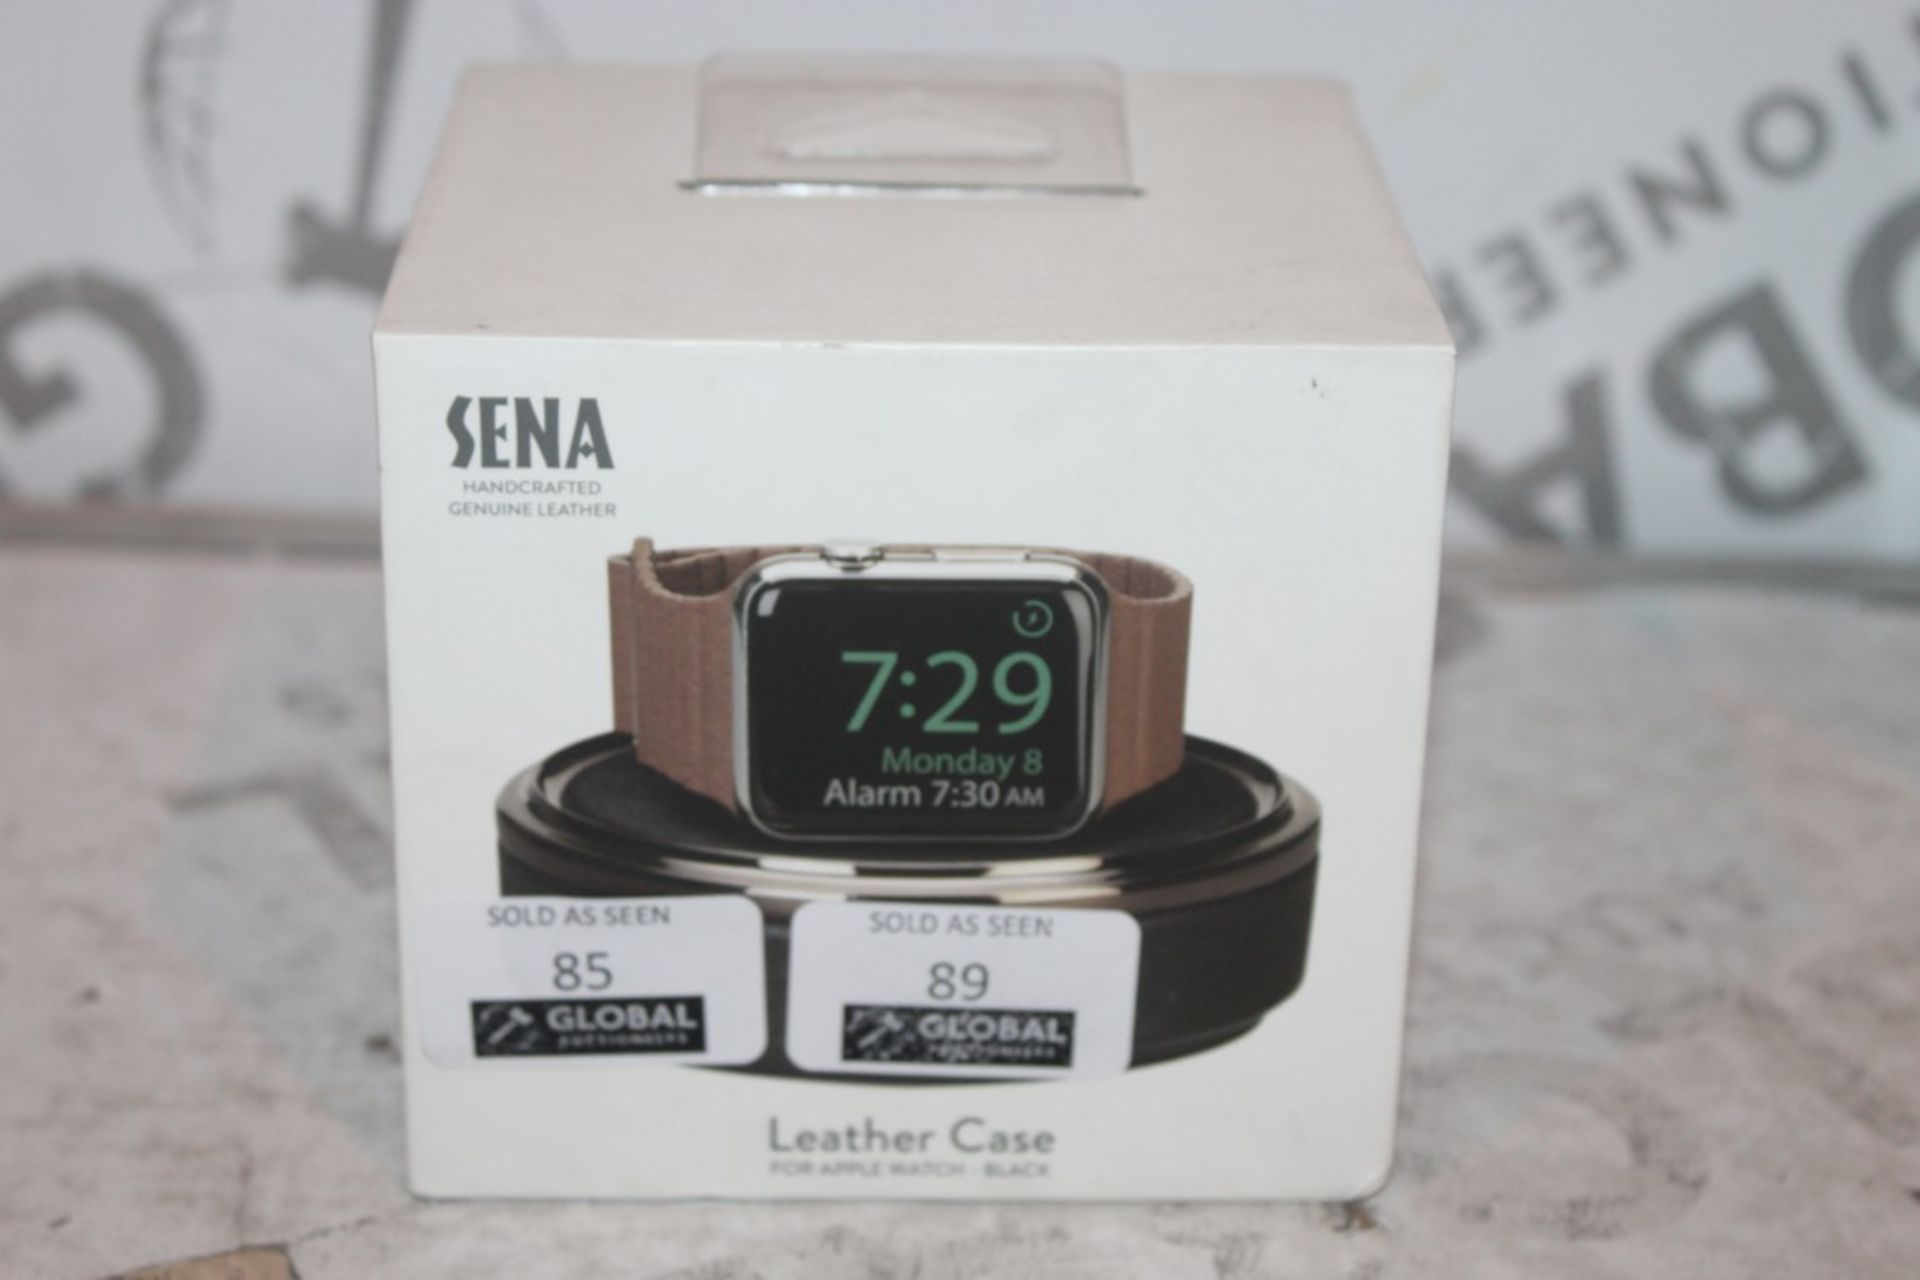 Boxed Brand-new Sena, Hand Crafted genuine Leather, Black Apple Watch Box, RRP£45.00